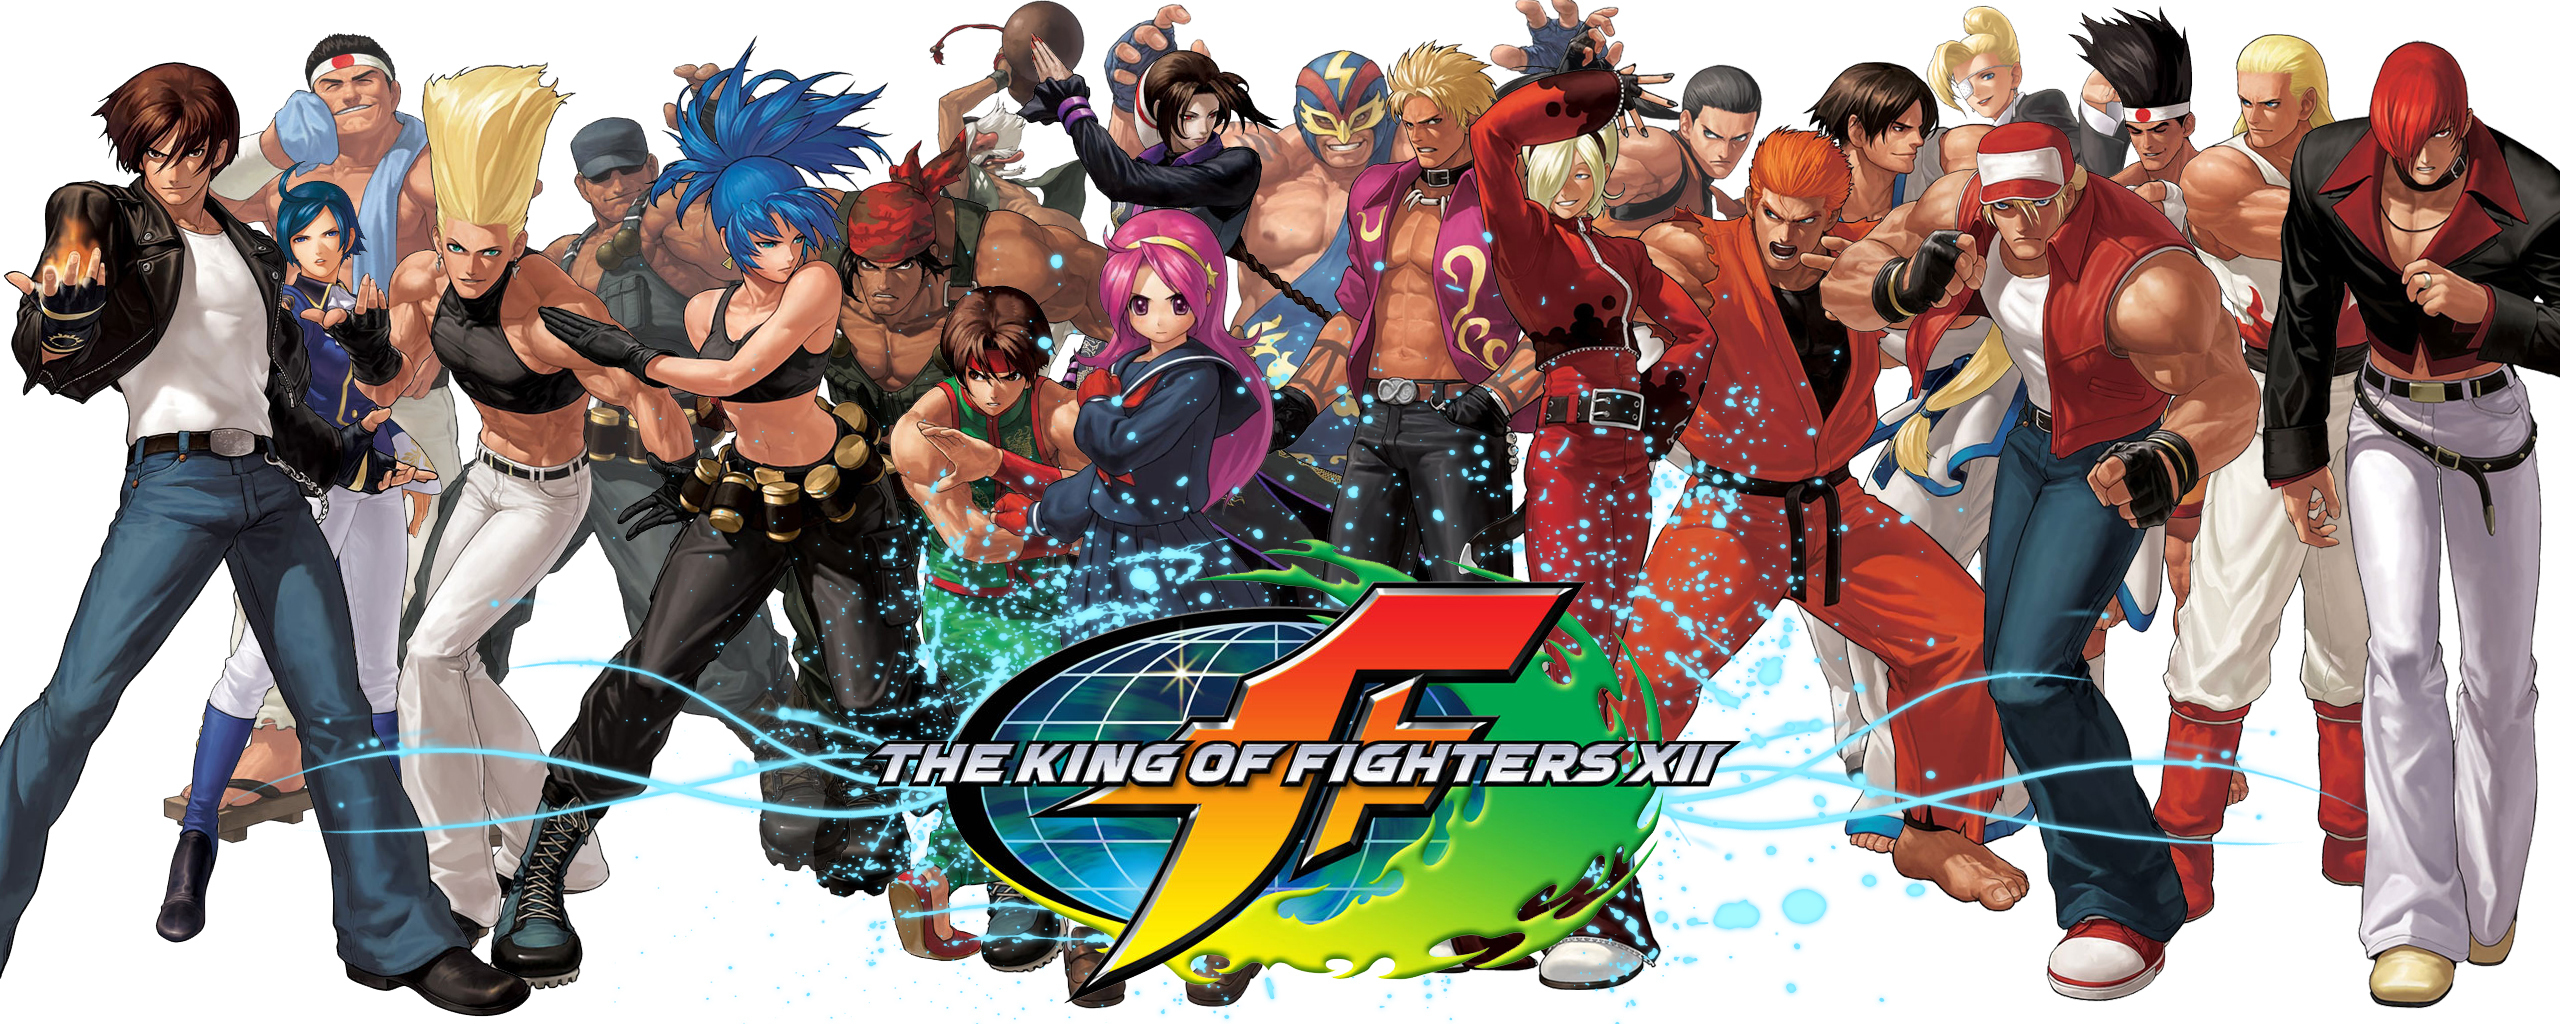 Nice wallpapers Kings Of Fighters 2560x1024px